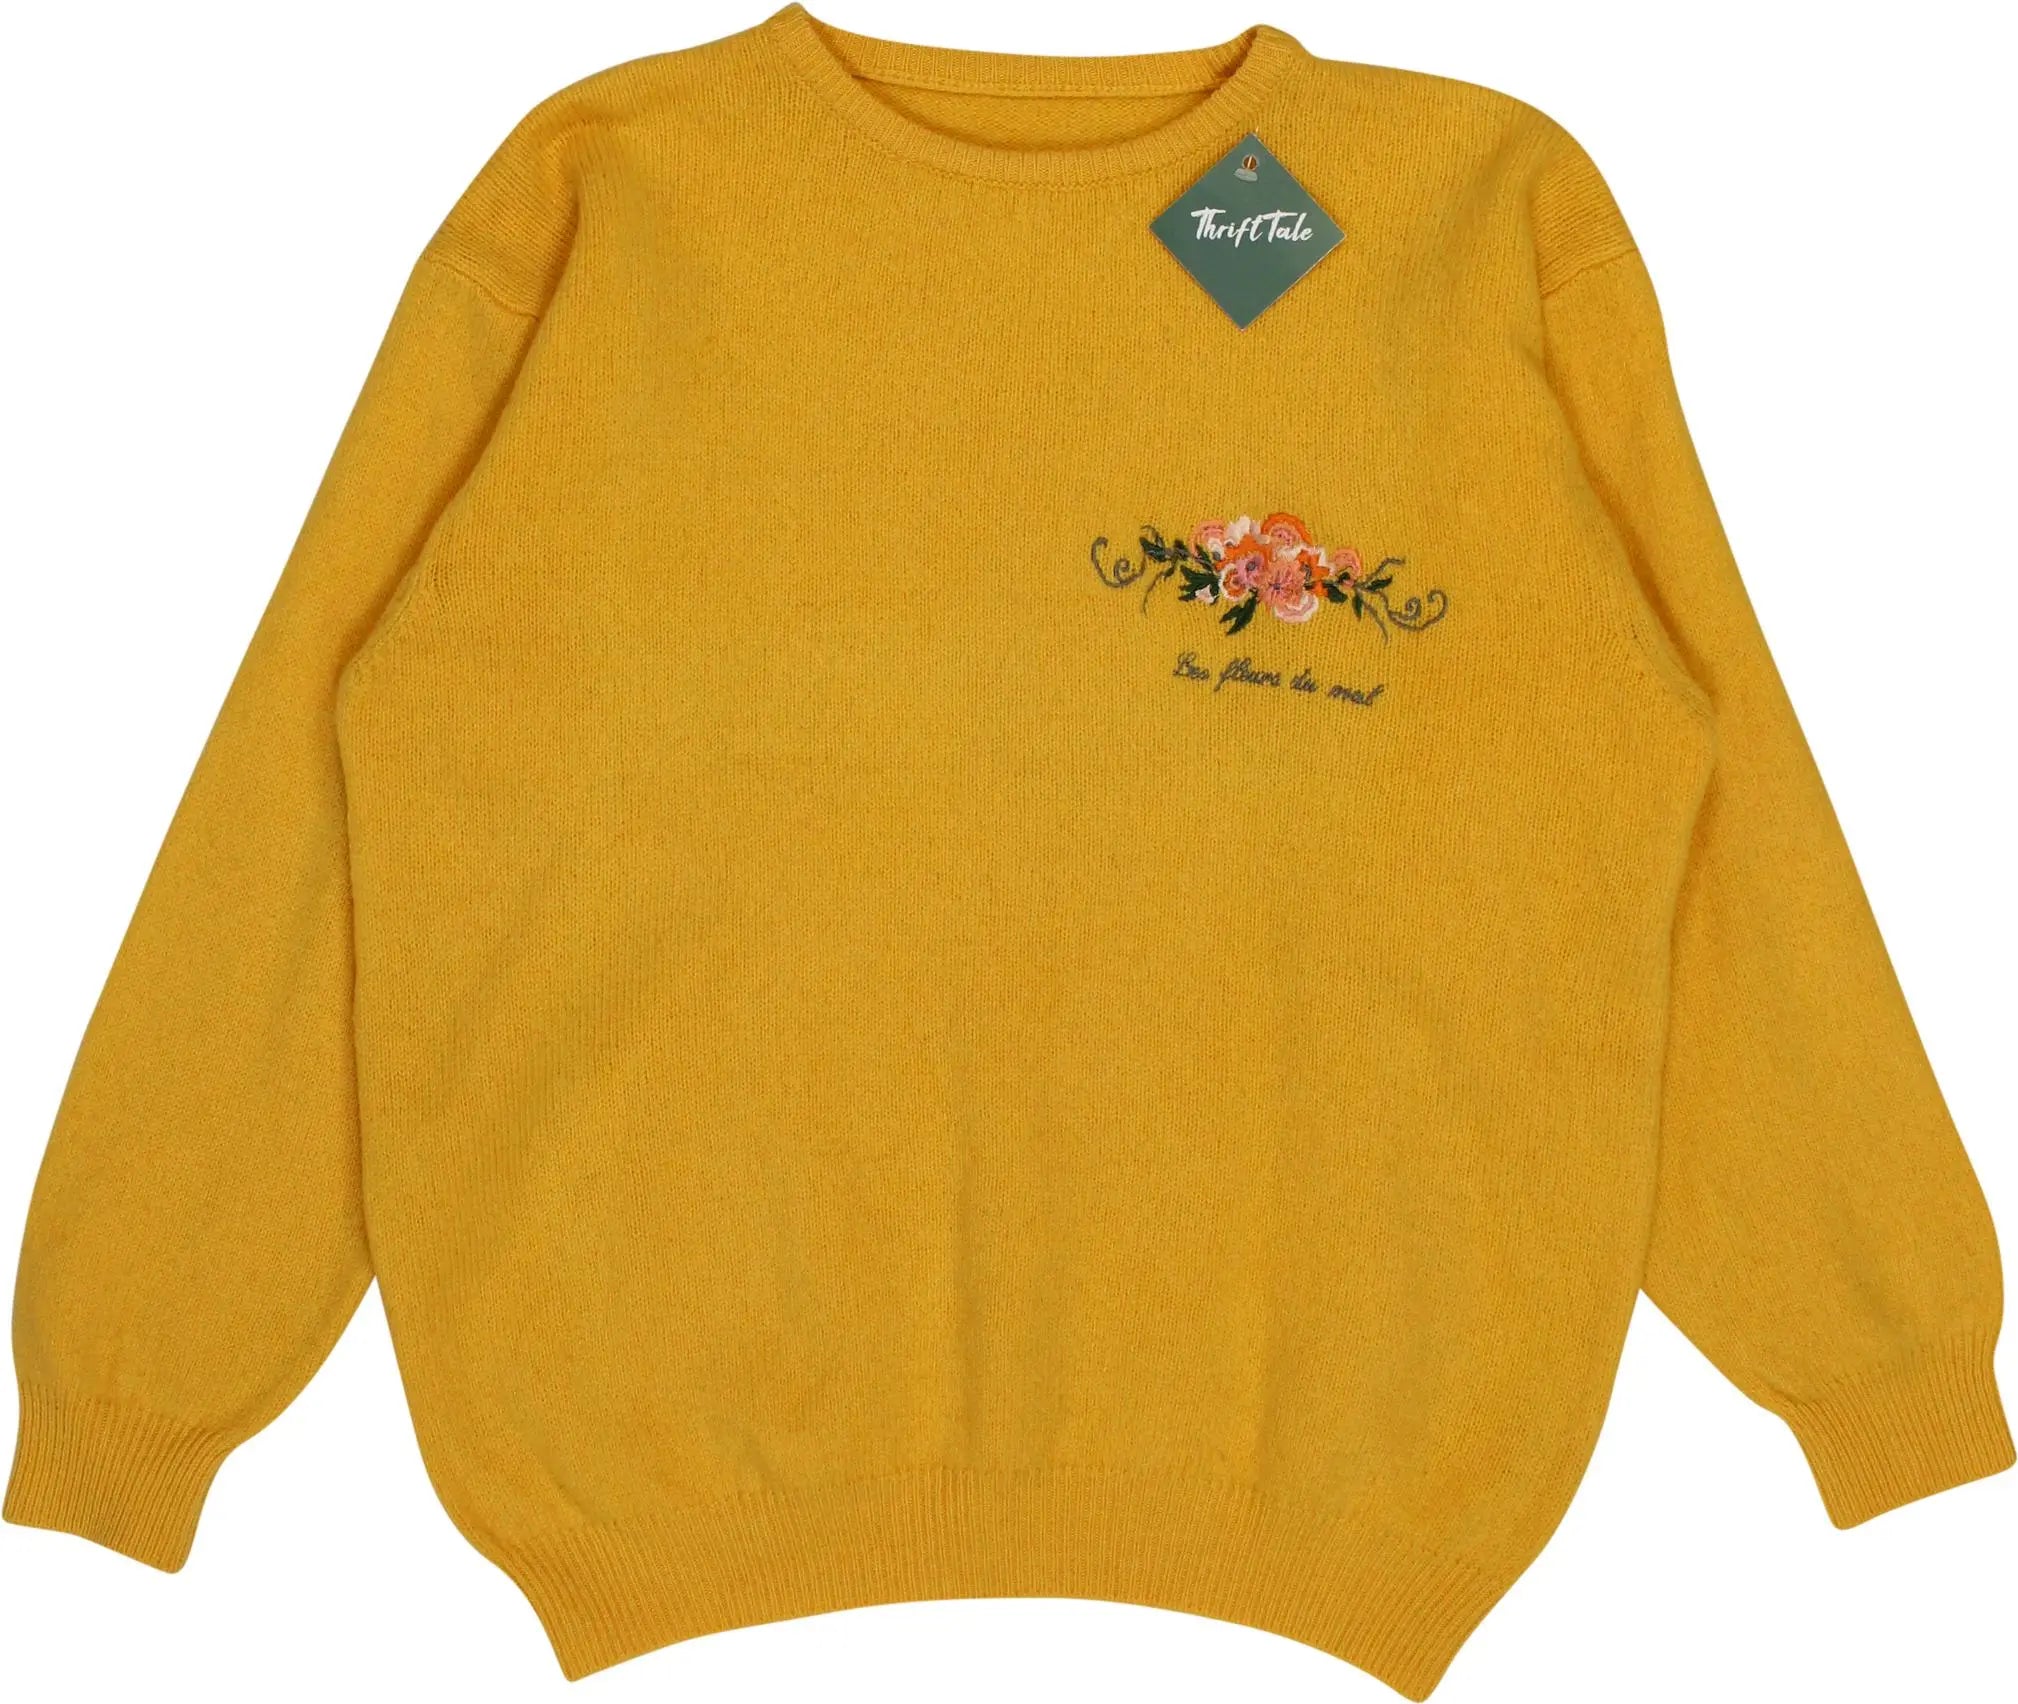 Unknown - Wool Blend Embroidered Jumper- ThriftTale.com - Vintage and second handclothing